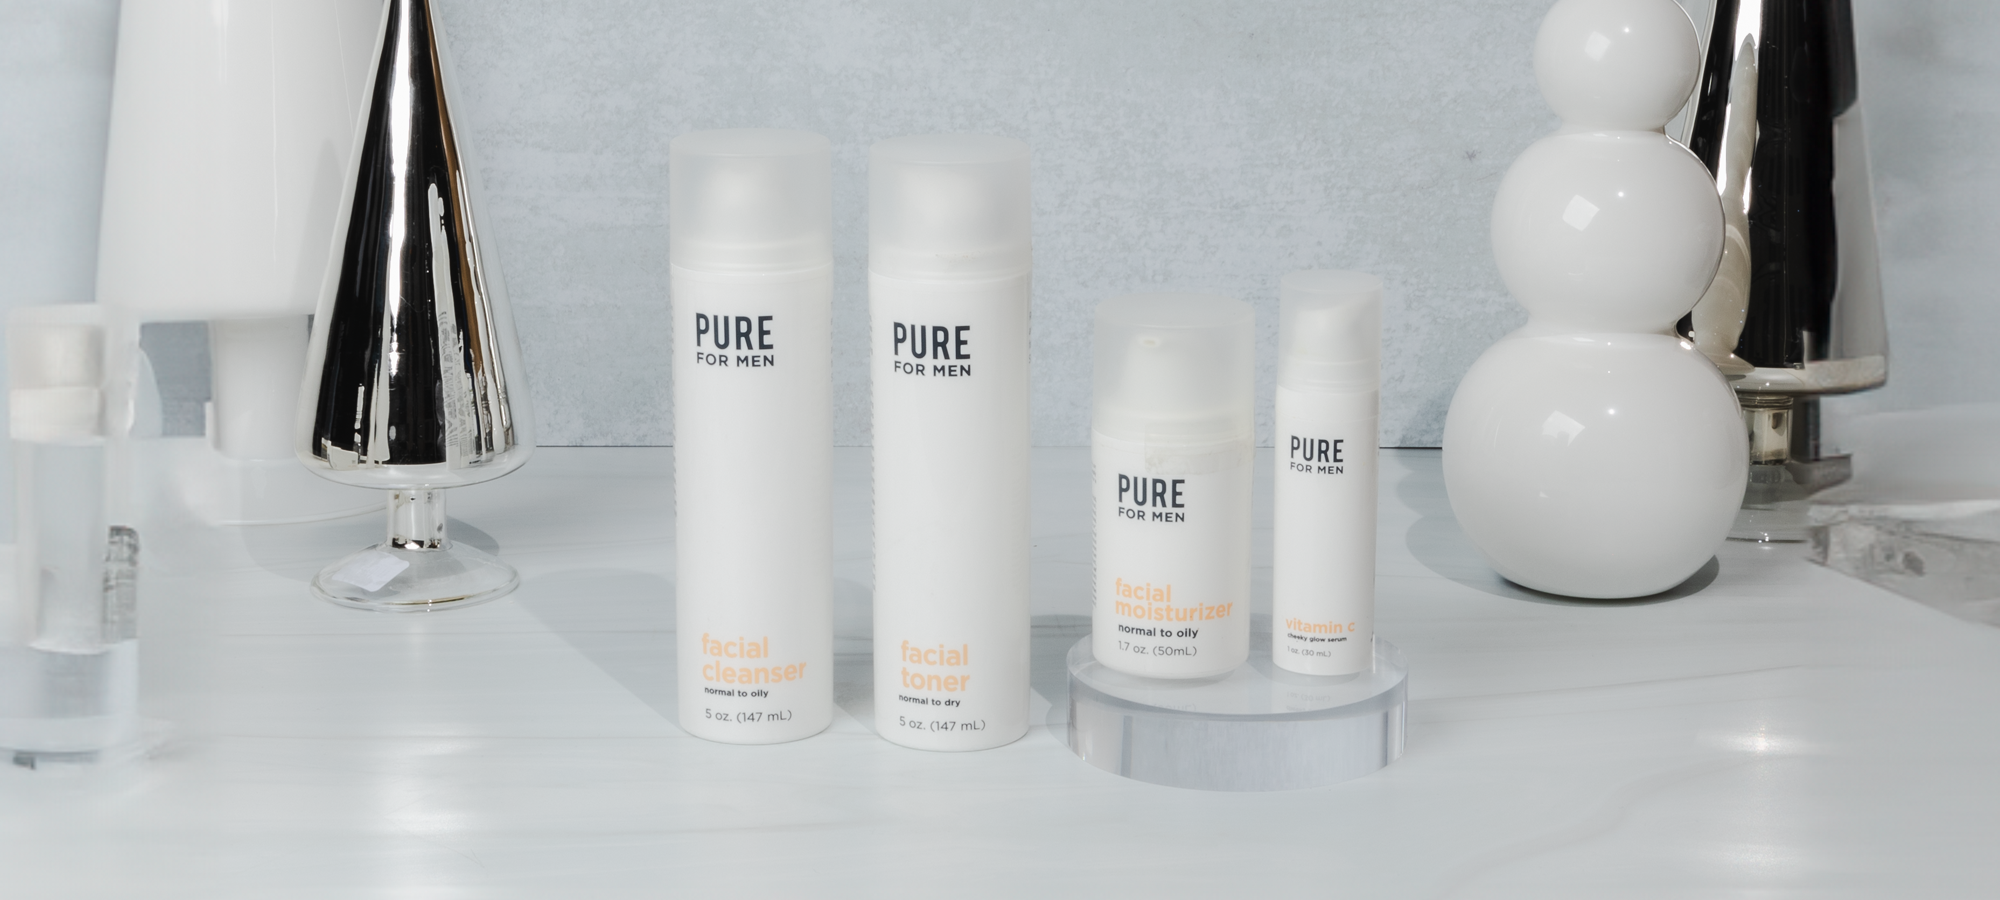 Pure for Men Face Collection Hero Image 2000x900